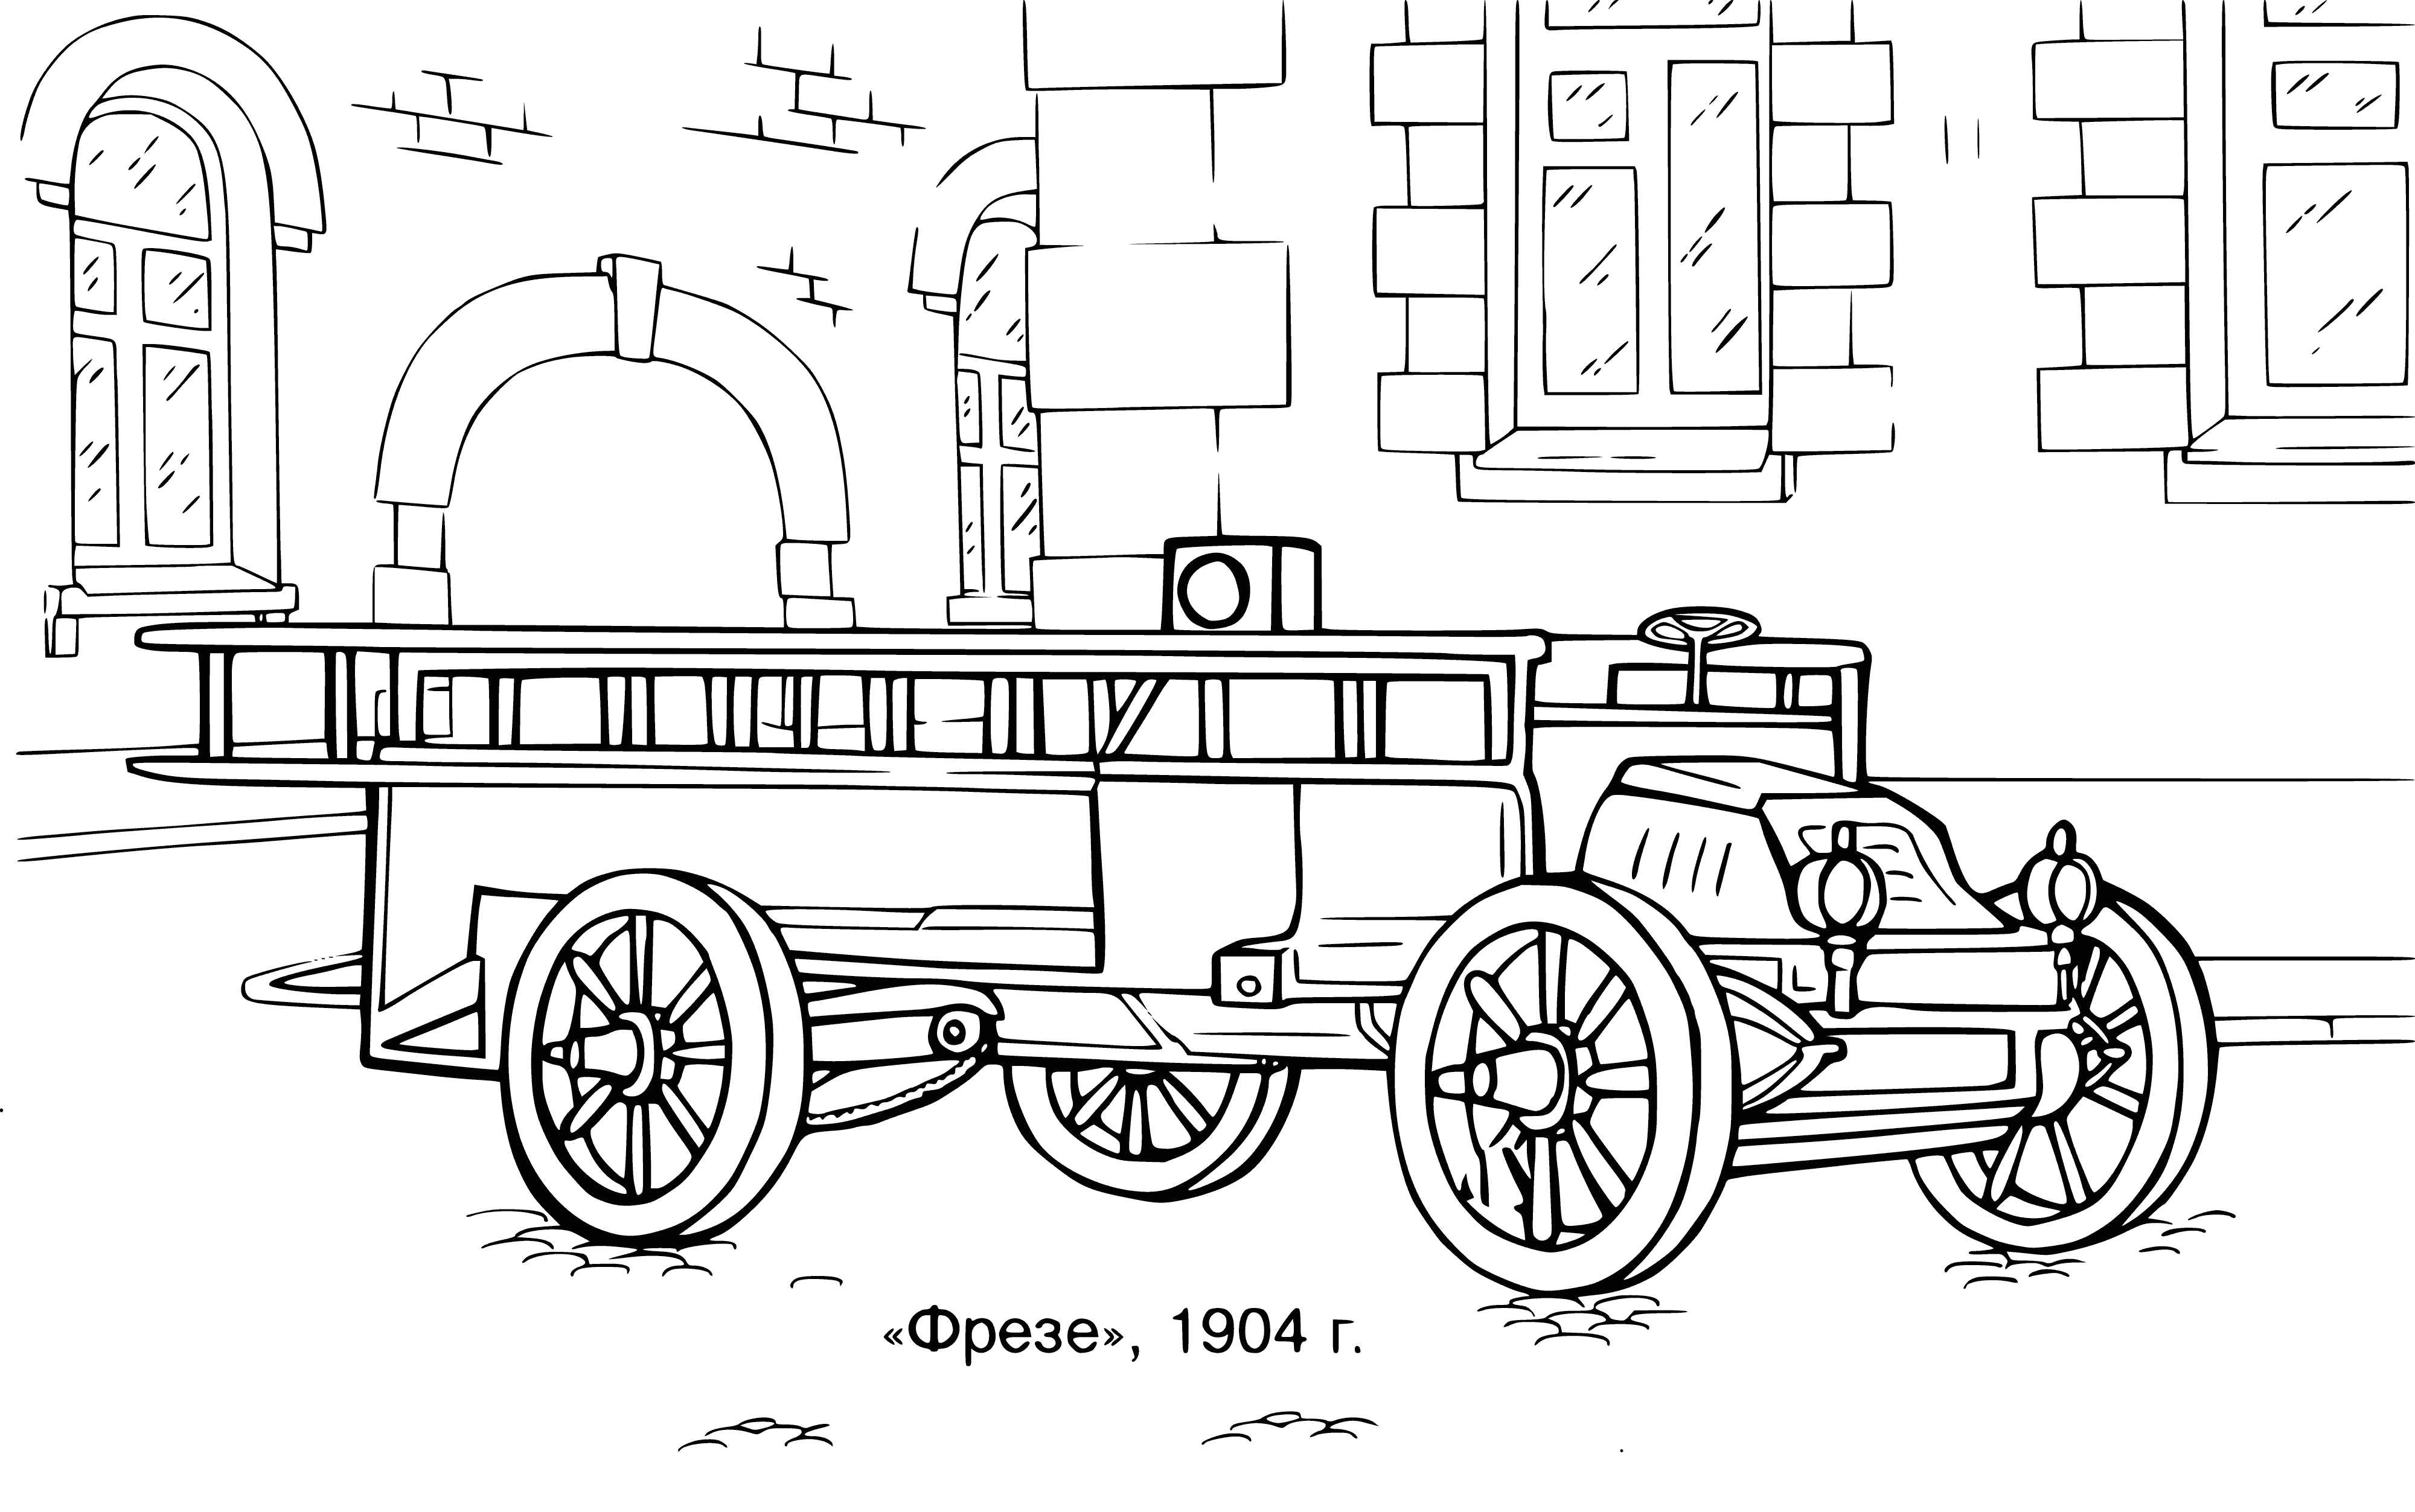 Fire fighting equipment 1904 coloring page